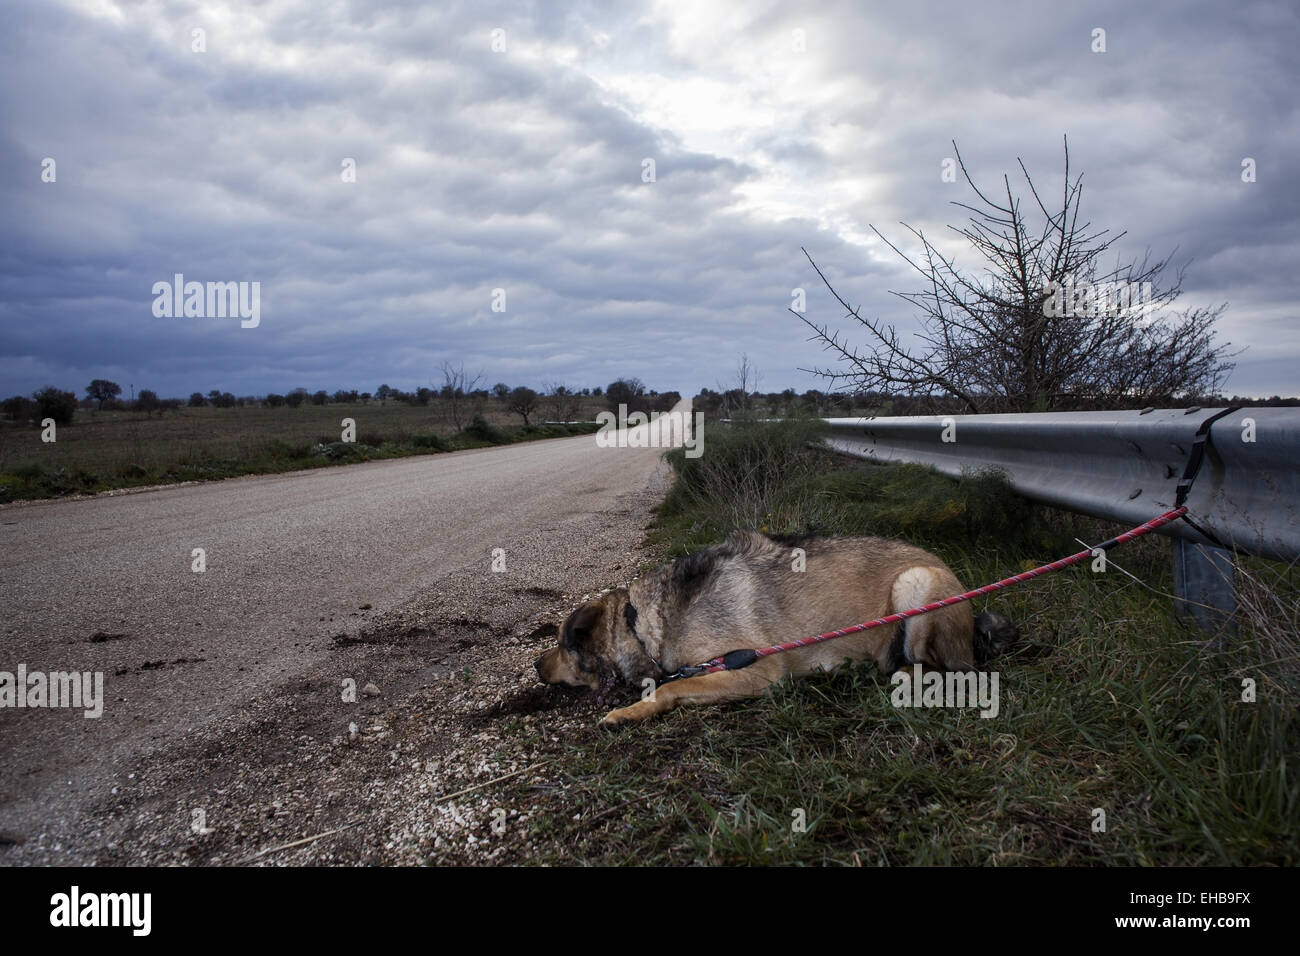 Abandoned Dog Tied with a Leash on a Guard Rail Stock Photo